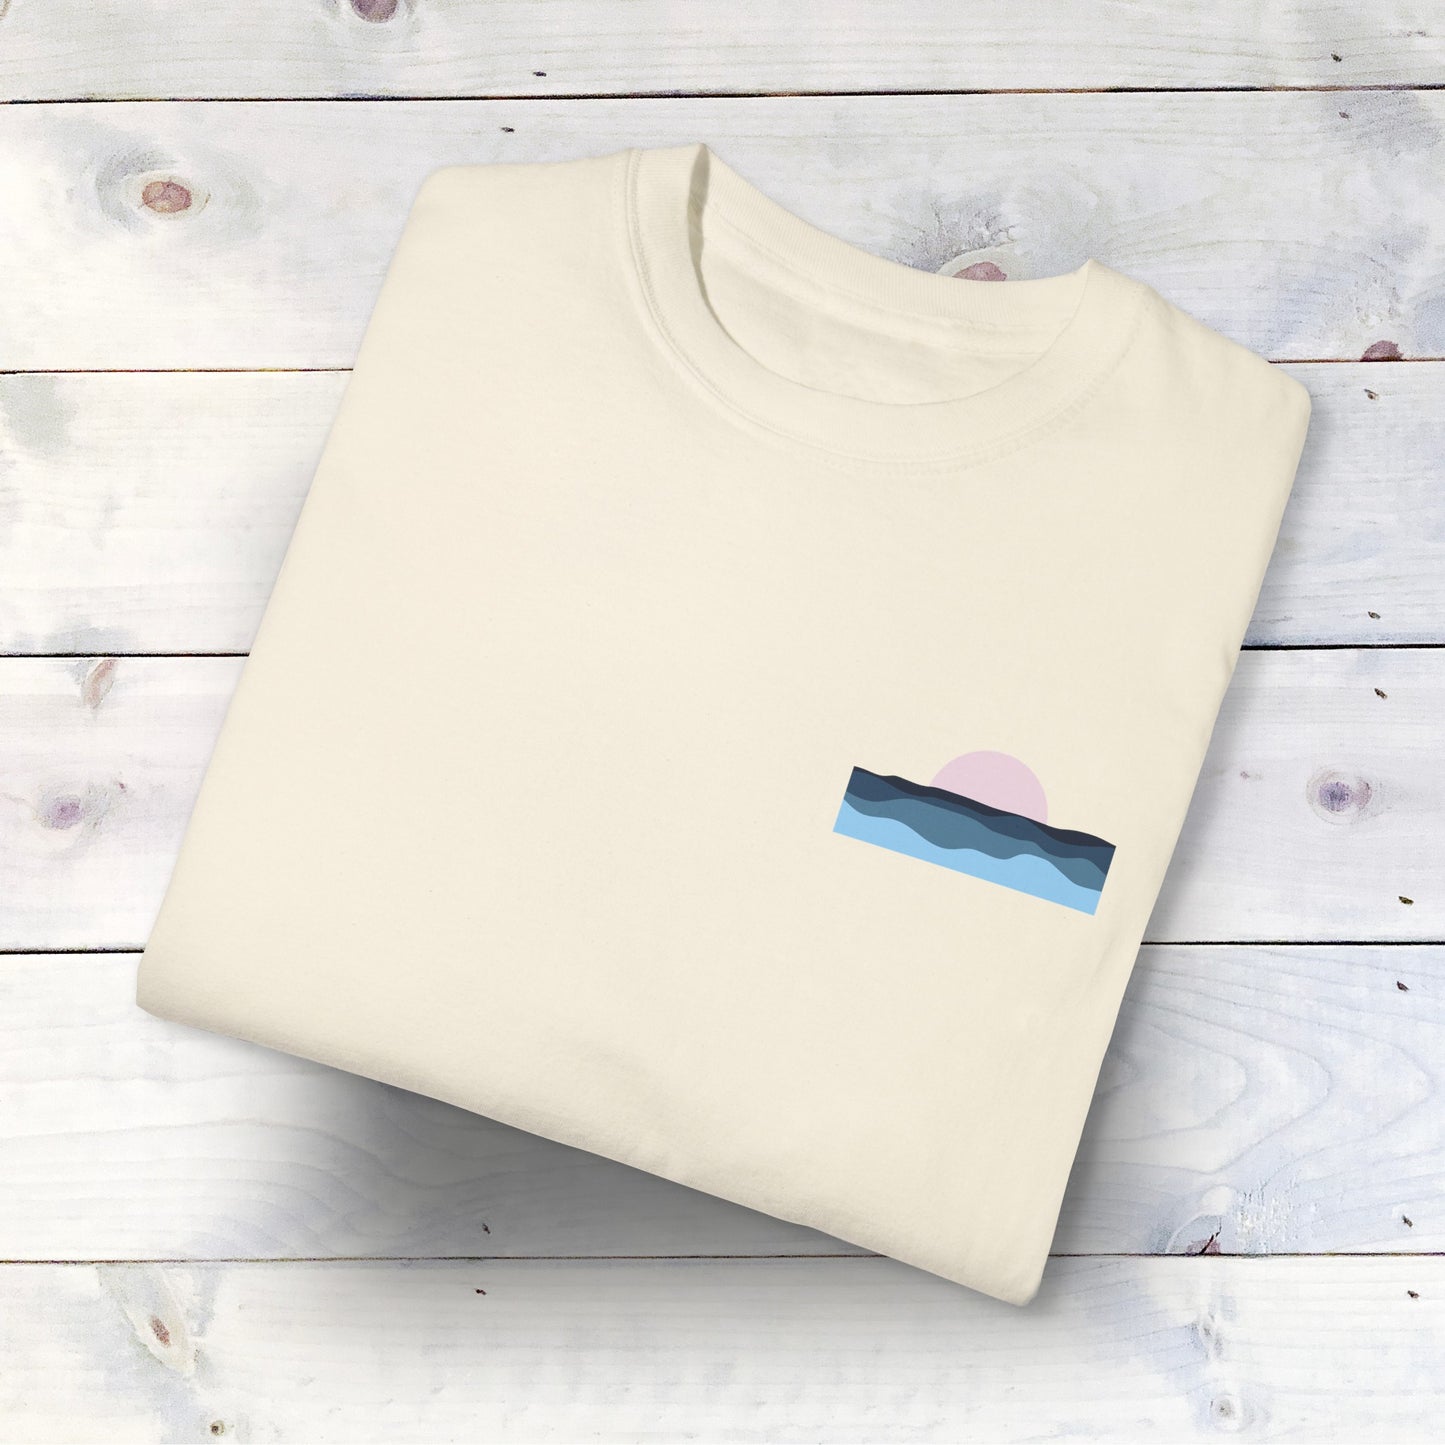 Everything Comes in Waves T-Shirt - Comfort Colors 1717, 100% Ring-Spun Cotton, Ivory, Relaxed Fit